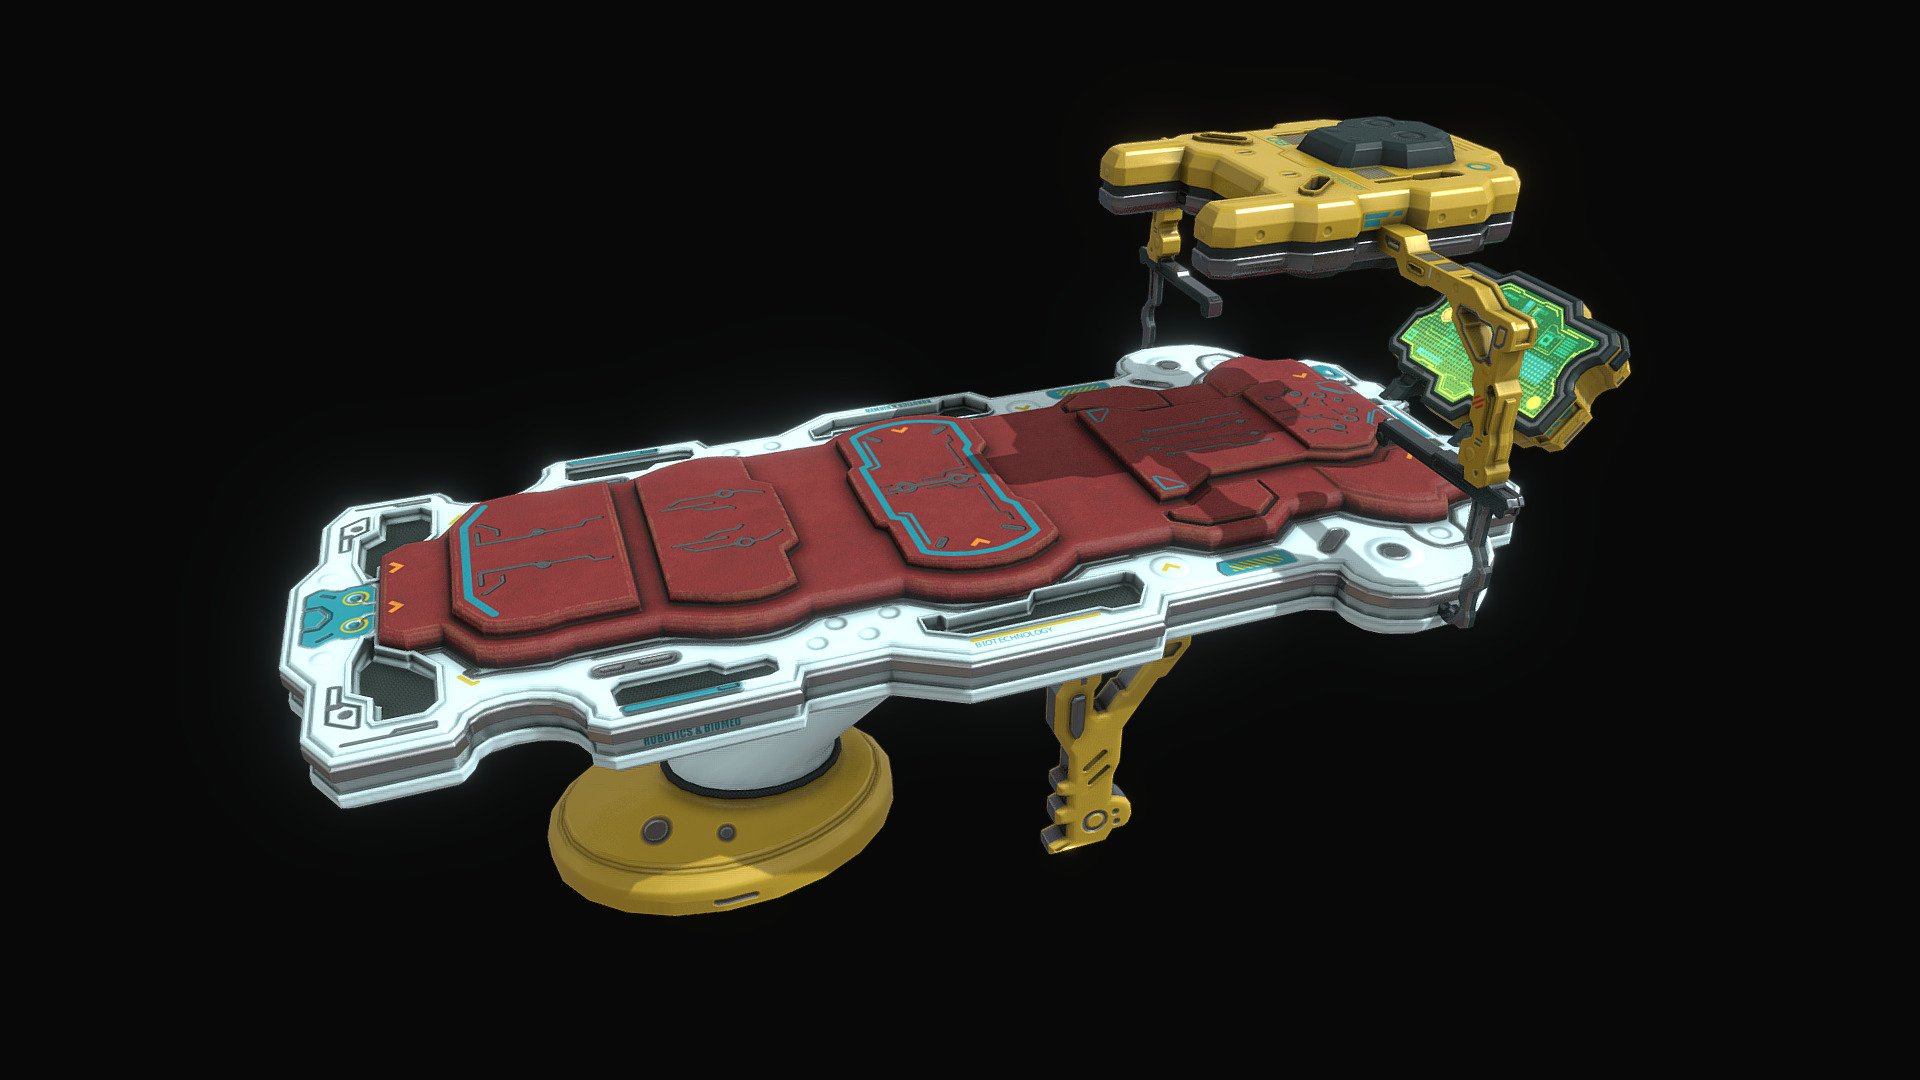 Low poly sci fi medical table environment asset.

17 280 tris.

File formats - blend, fbx, obj

Ready for games and other real time applications.

2 sets of PBR textures - 4096x4096 png format

Base color map,

Normal map,

Roughness map,

Metallic map ,

Ambient Occlusion map,

Emissive map,

Also included Substance painter texture maps presets for:

Unreal Engine 4,

Unity (Standart Metallic) 3d model